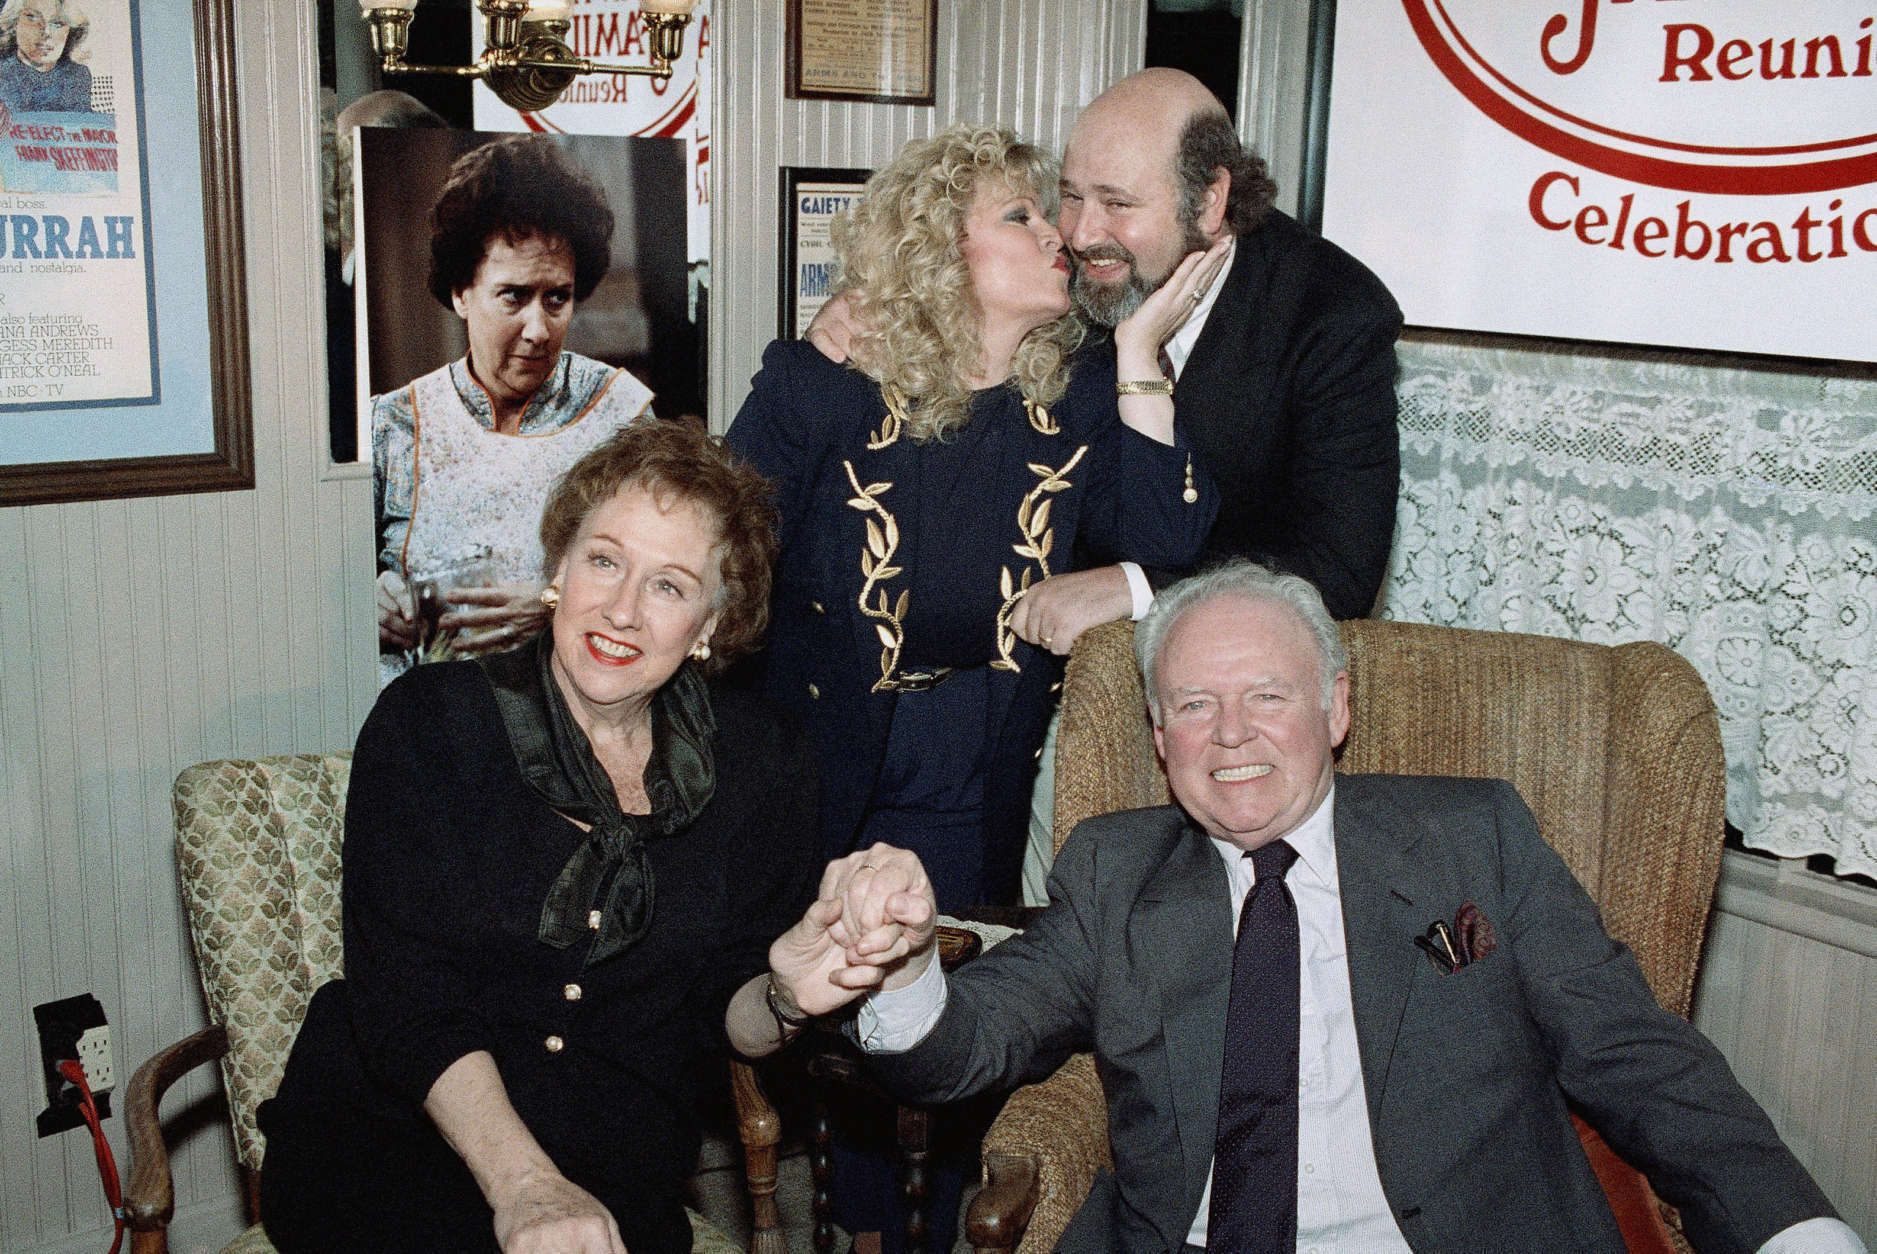 Sally Struthers plants a kiss on the cheek of Rob Reiner, right, Carroll O'Connor and Jean Stapleton hold hands during a reunion of the cast of ?All in the Family? at O?Conner restaurant, Monday, Feb. 12, 1991 in Beverly Hill, Calif. The Archie Bunker household returns to television in a 90-minute 20th anniversary special featuring highlights of series, Saturday on CBS. (AP Photo/Chris Martinez)